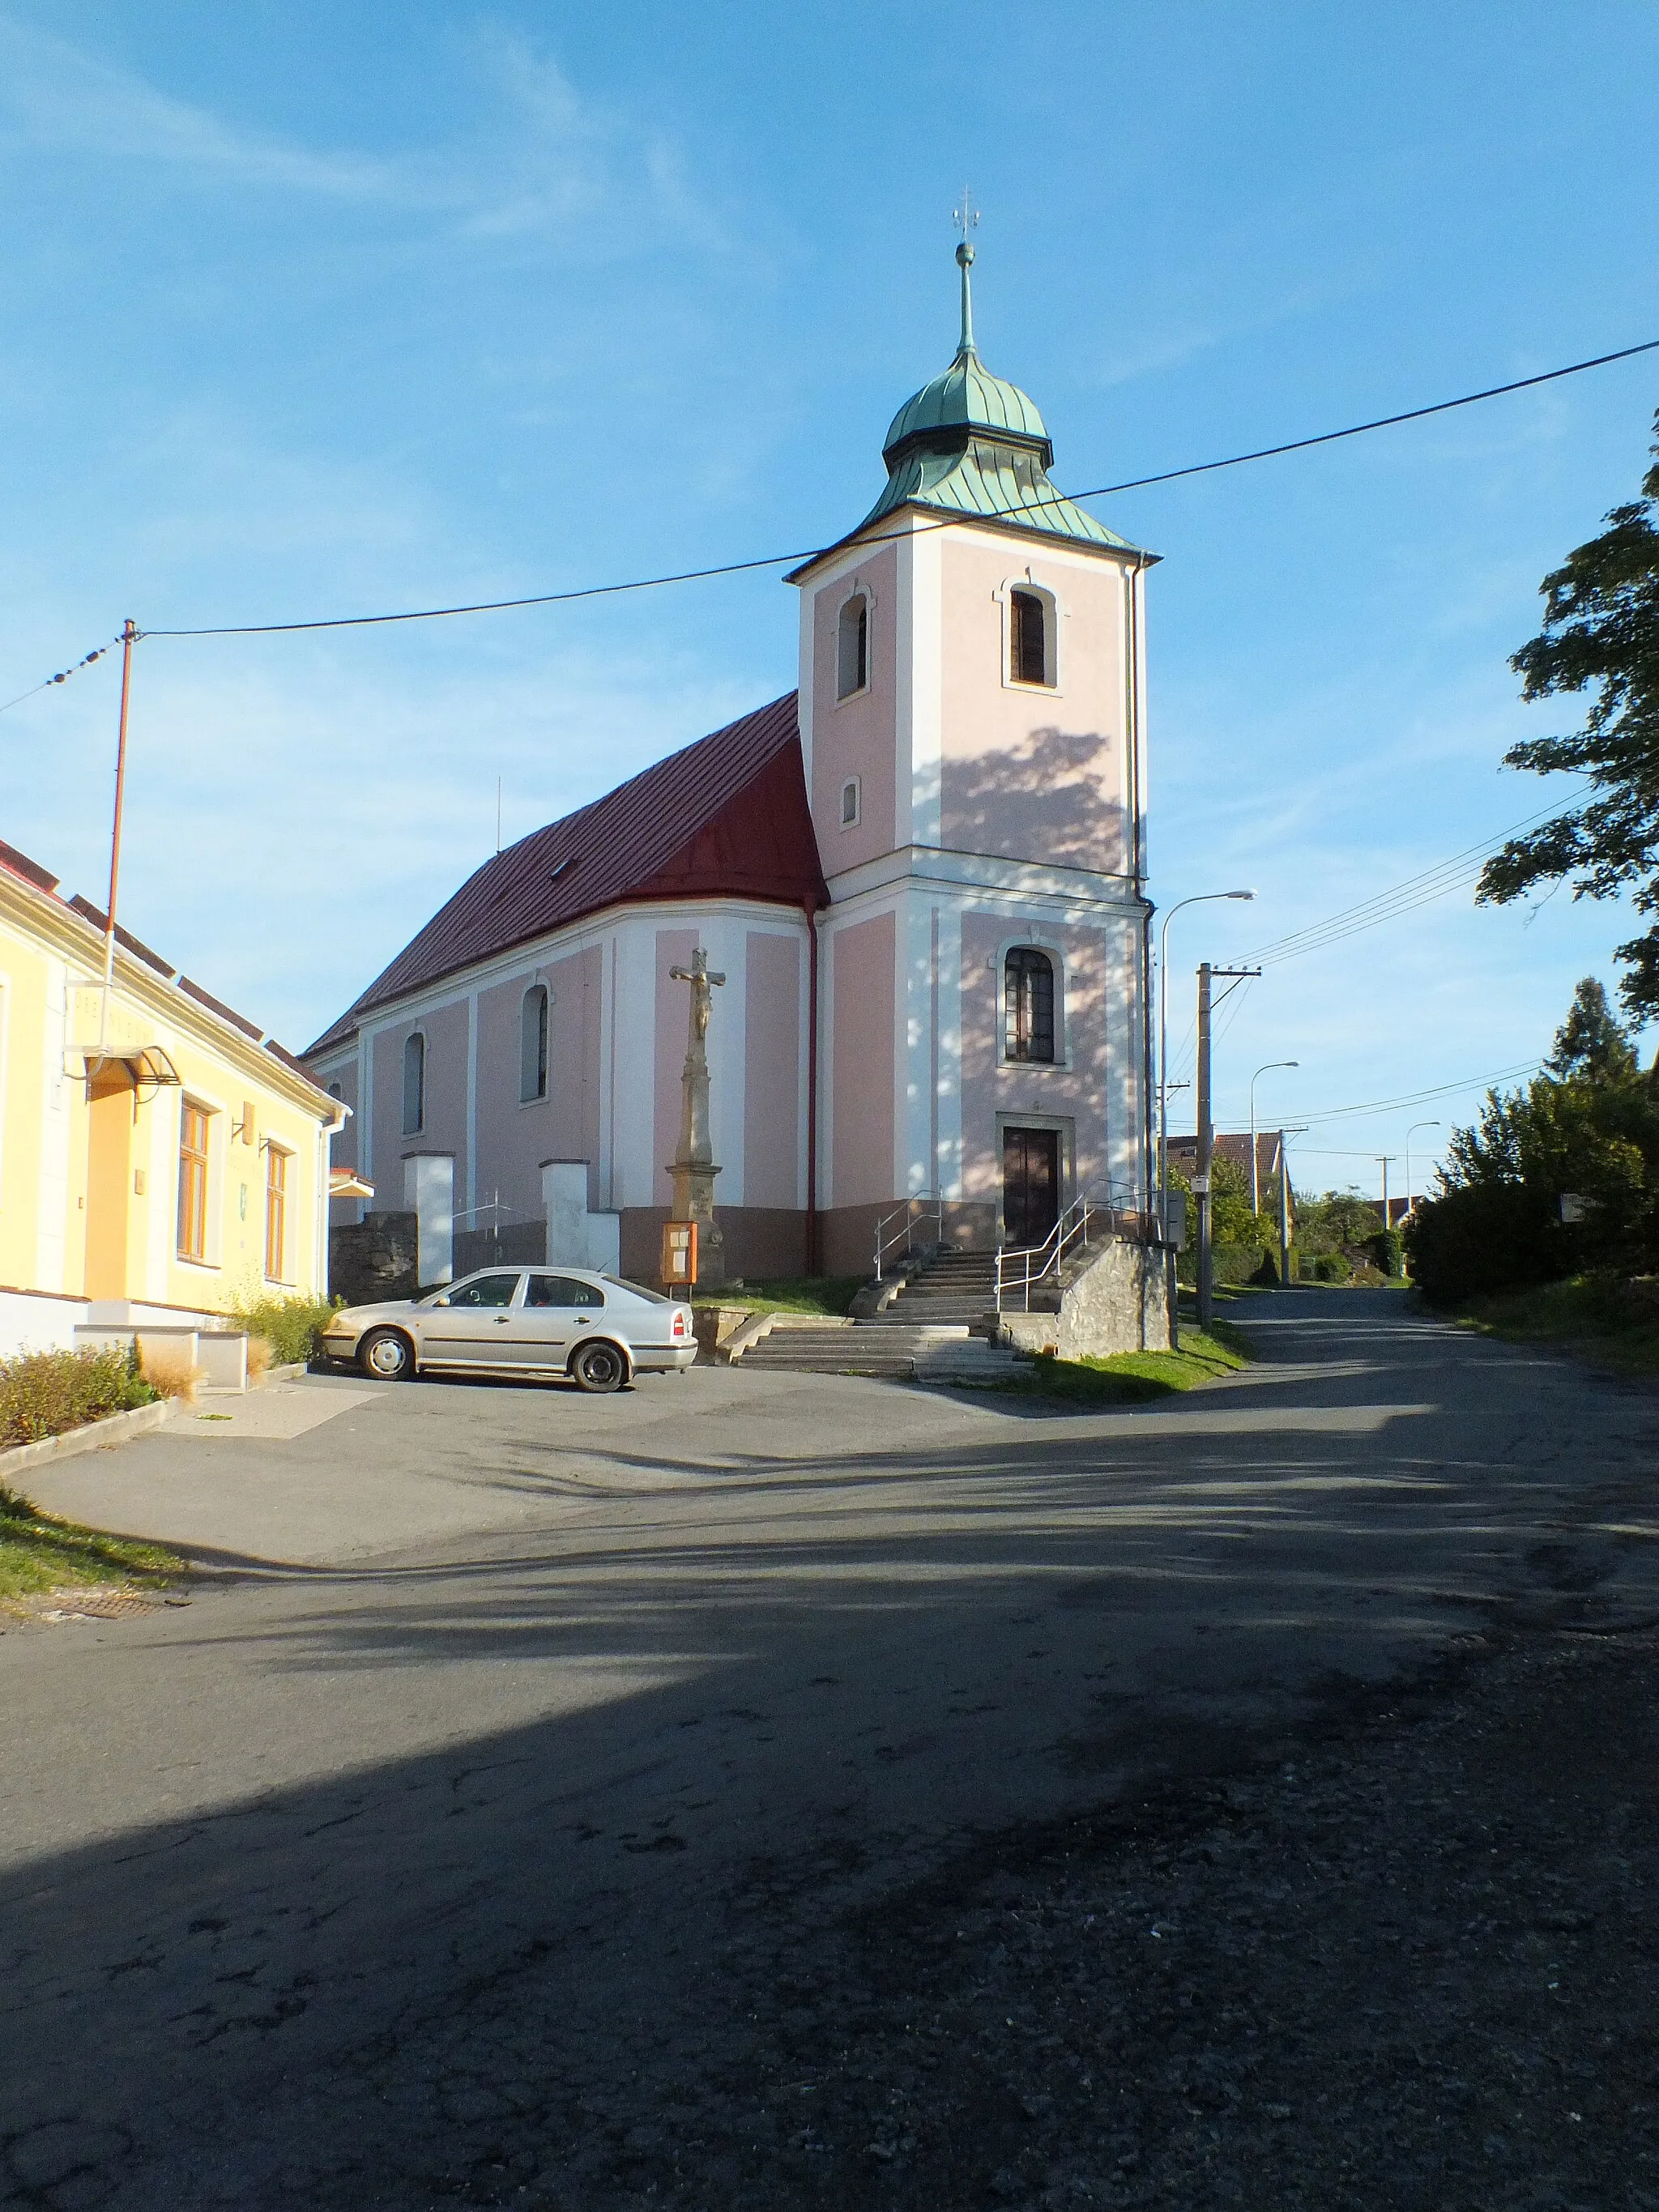 Photo showing: The Saint Nicholas church in Partutovice